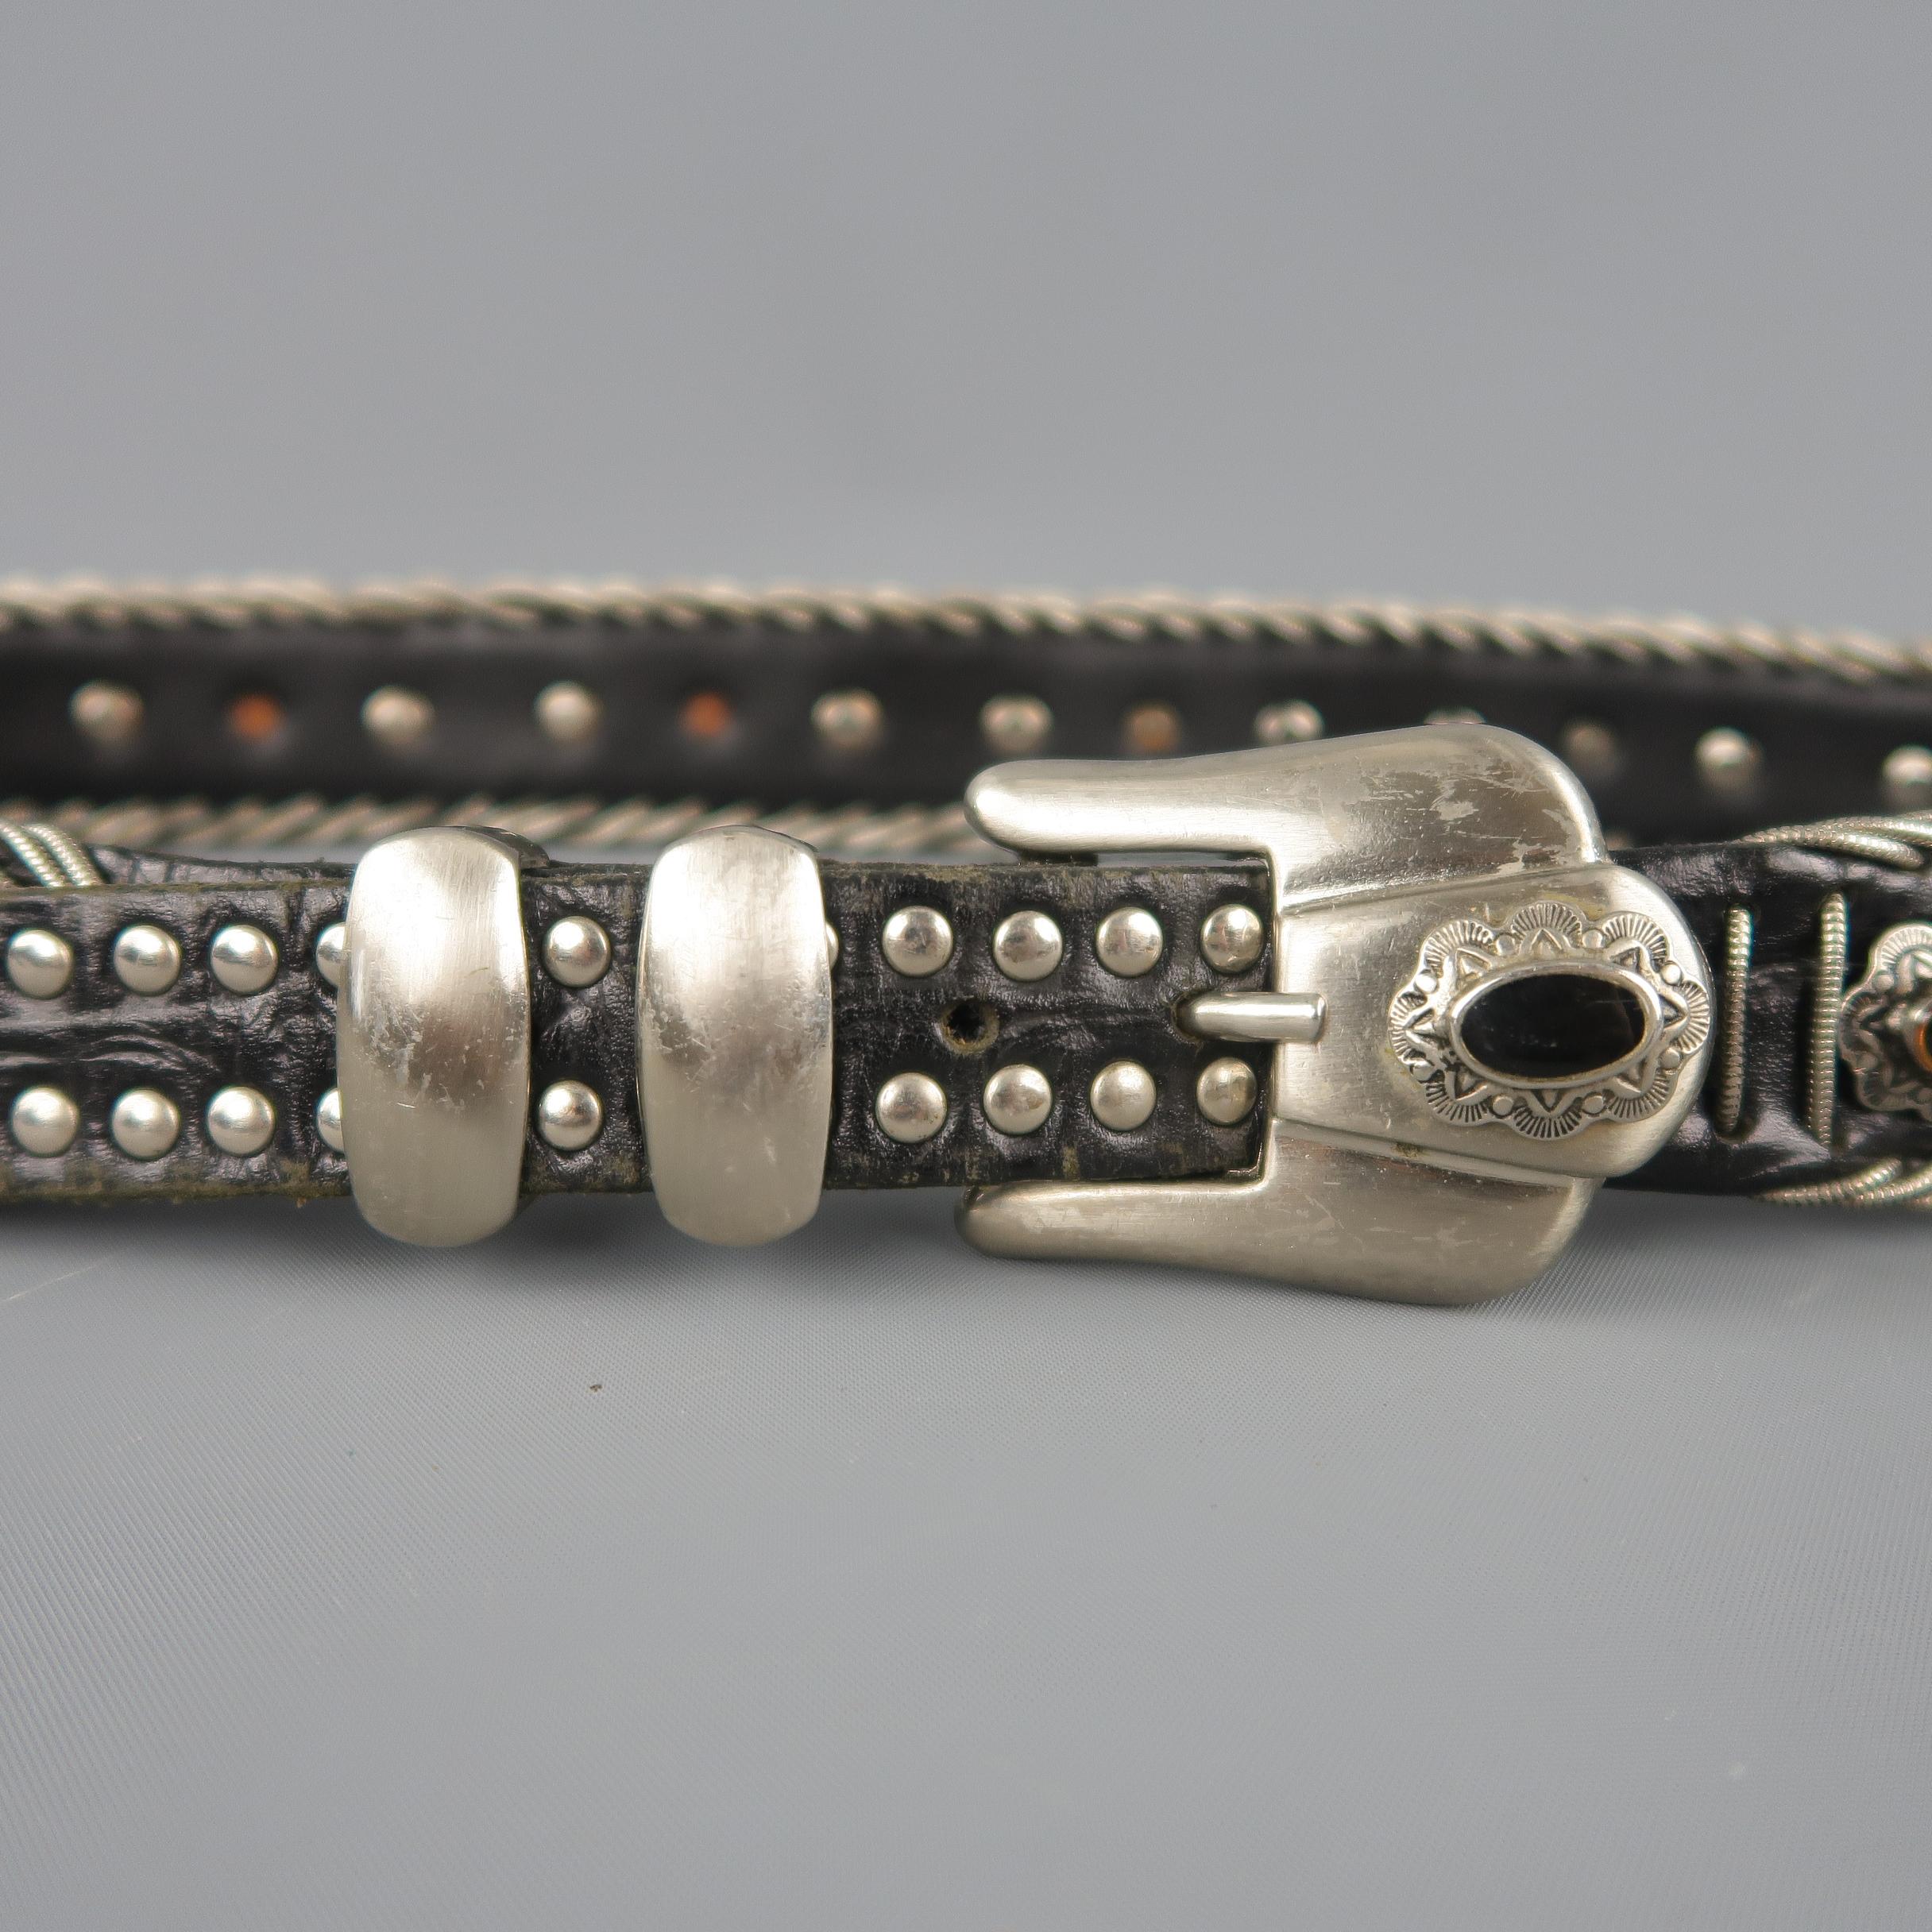 Vintage NAANI Western style belt features a black leather strap with silver metal braided trim and silver studs with black enamel with embellished buckle. Wear throughout. Made in Italy.
 
Good Pre-Owned Condition.
Marked: 85/34
 
Length: 39